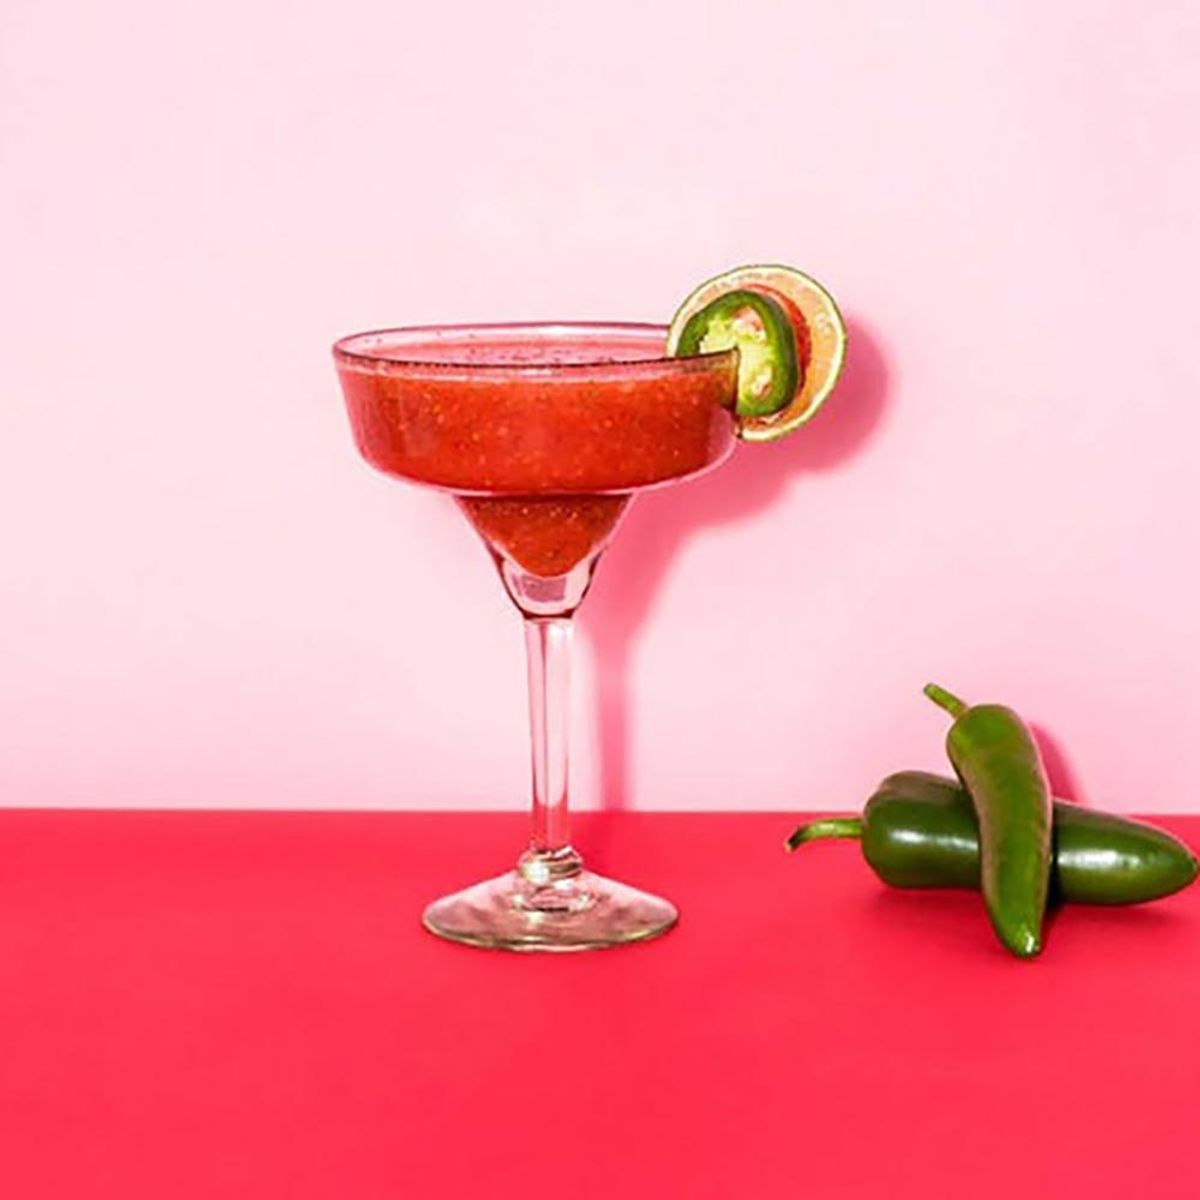 15 Cocktails Every Twenty-Something Should Know How to Make